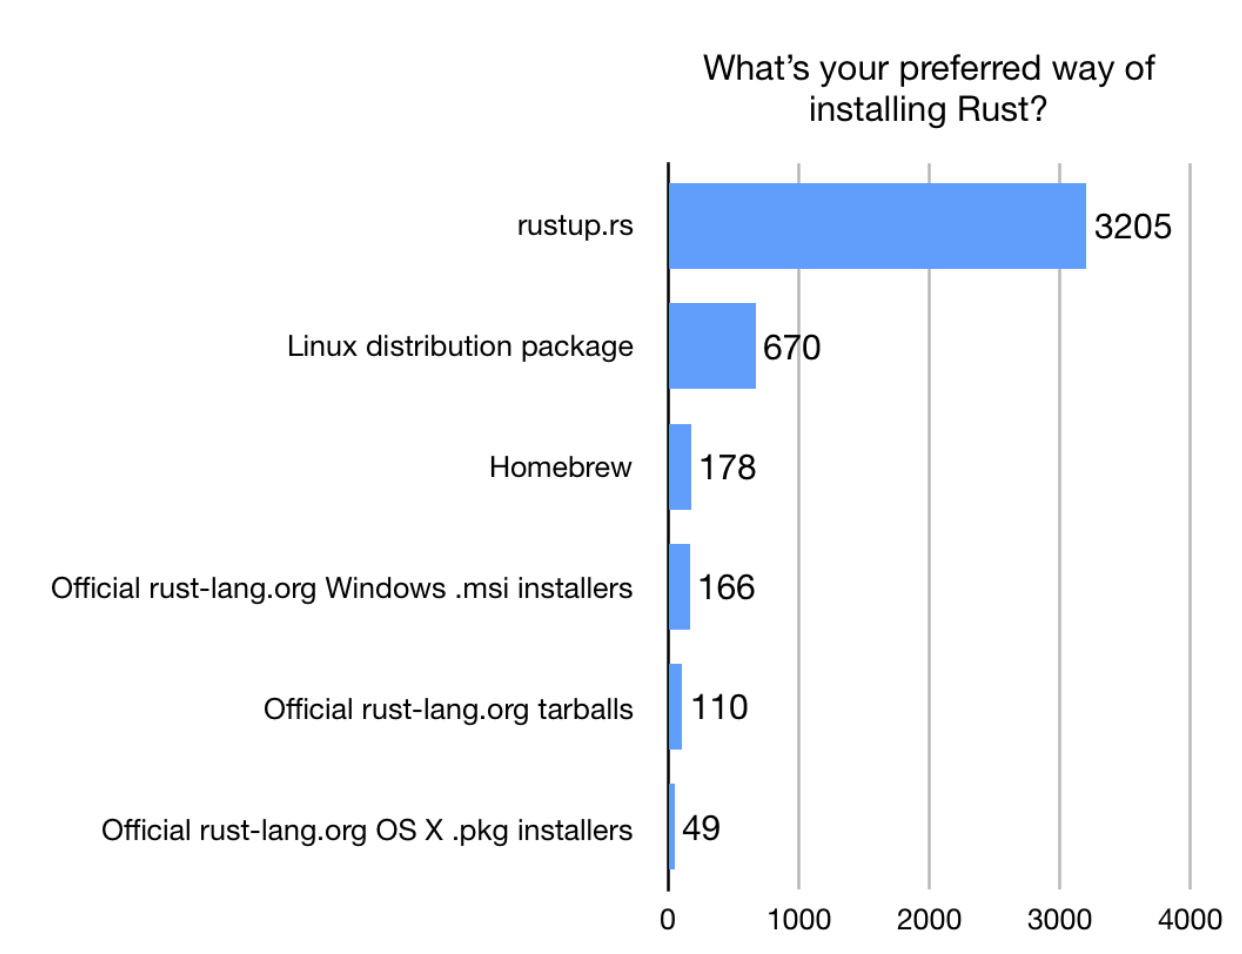 Chart: 90.2% rustup, 18.9% linux distros, 5% homebrew, 4.7% official .msi, 3.1% official tarball, 1.4% official mac pkg